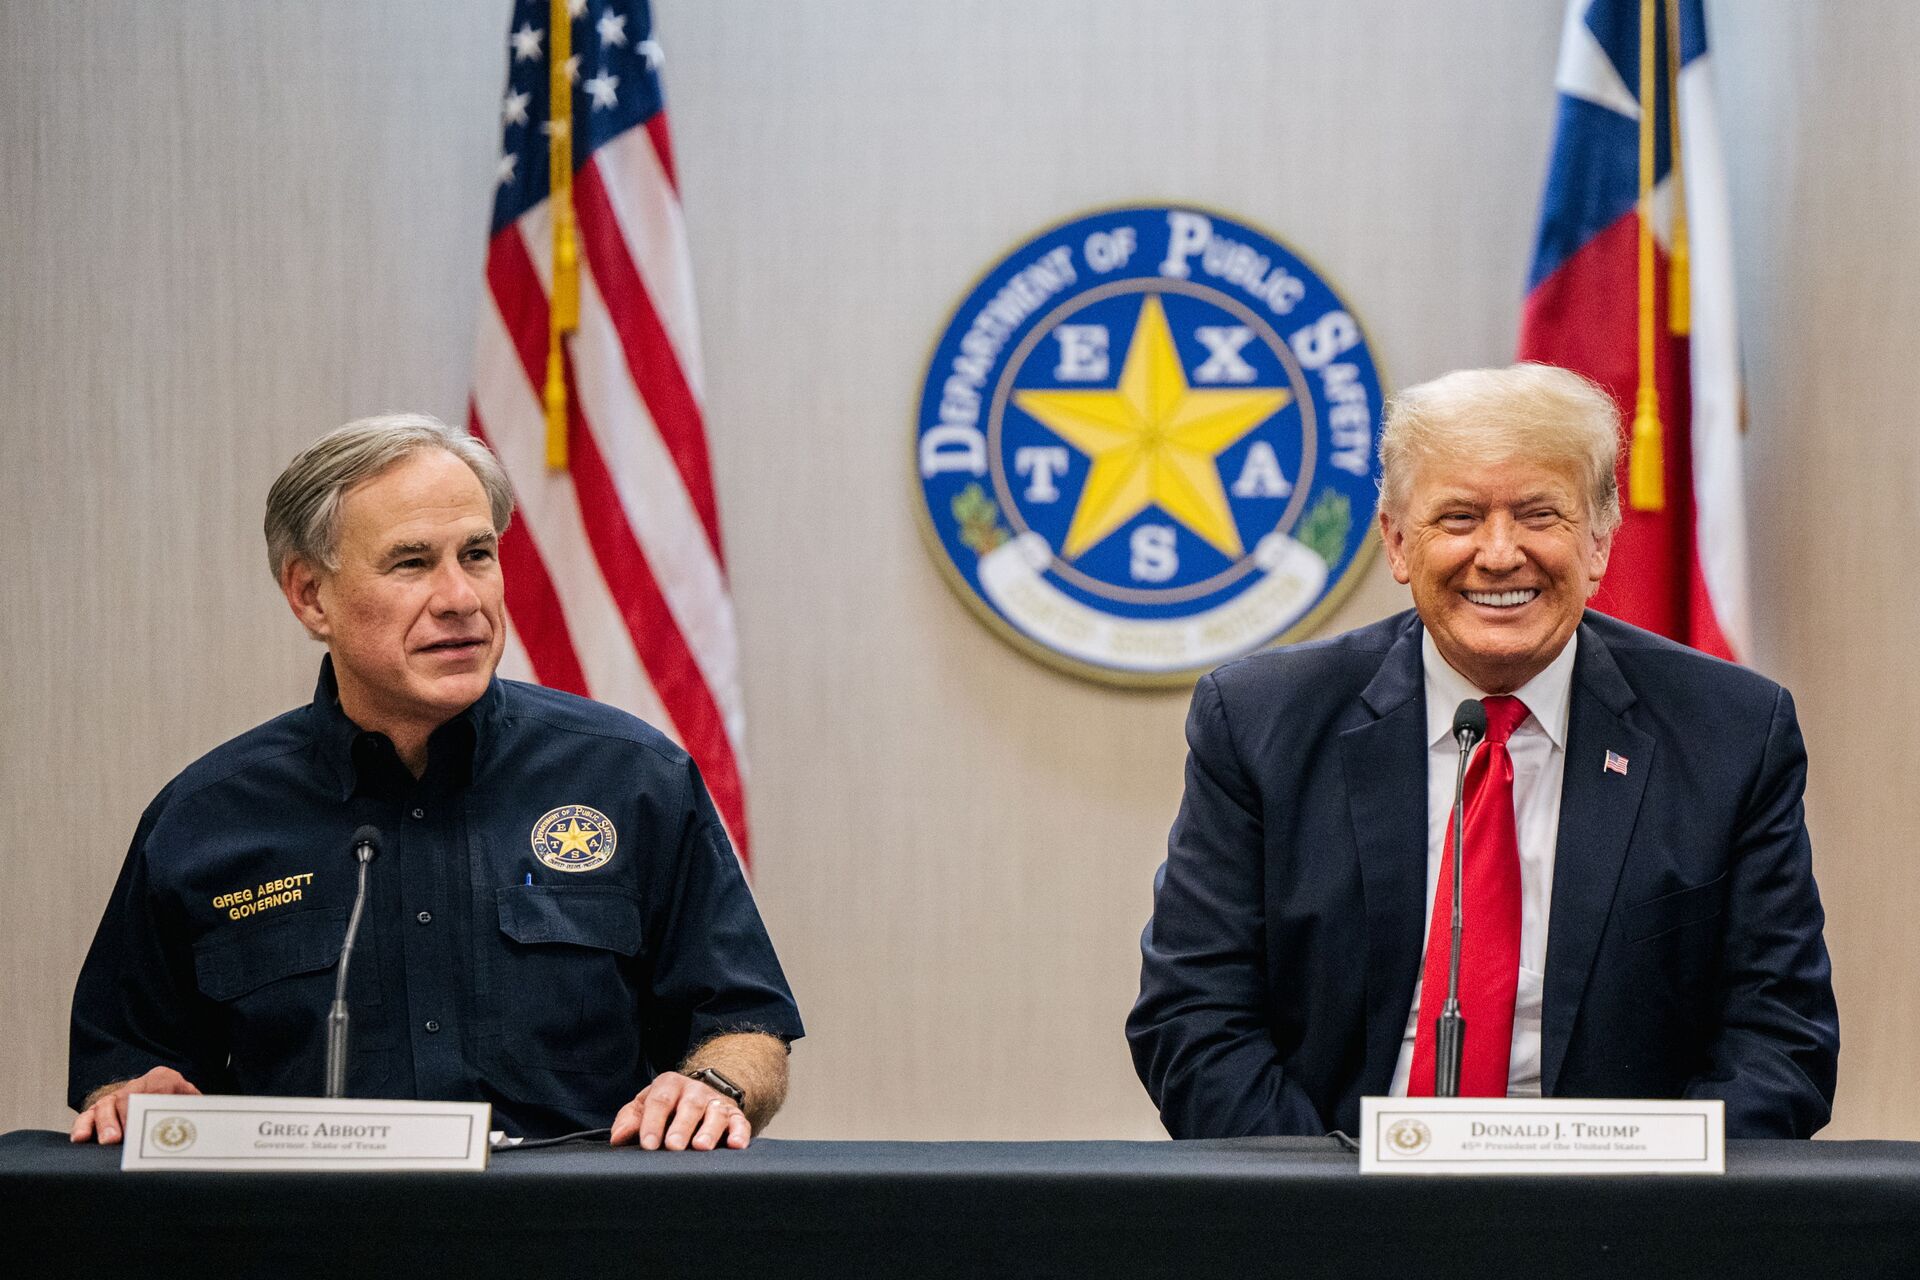 Texas Governor Greg Abbott addresses former U.S. President Donald Trump as Trump attends a border security briefing with the governor to discuss security at the U.S. southern border with Mexico in Weslaco, Texas, U.S. June 30, 2021.  - Sputnik International, 1920, 07.09.2021